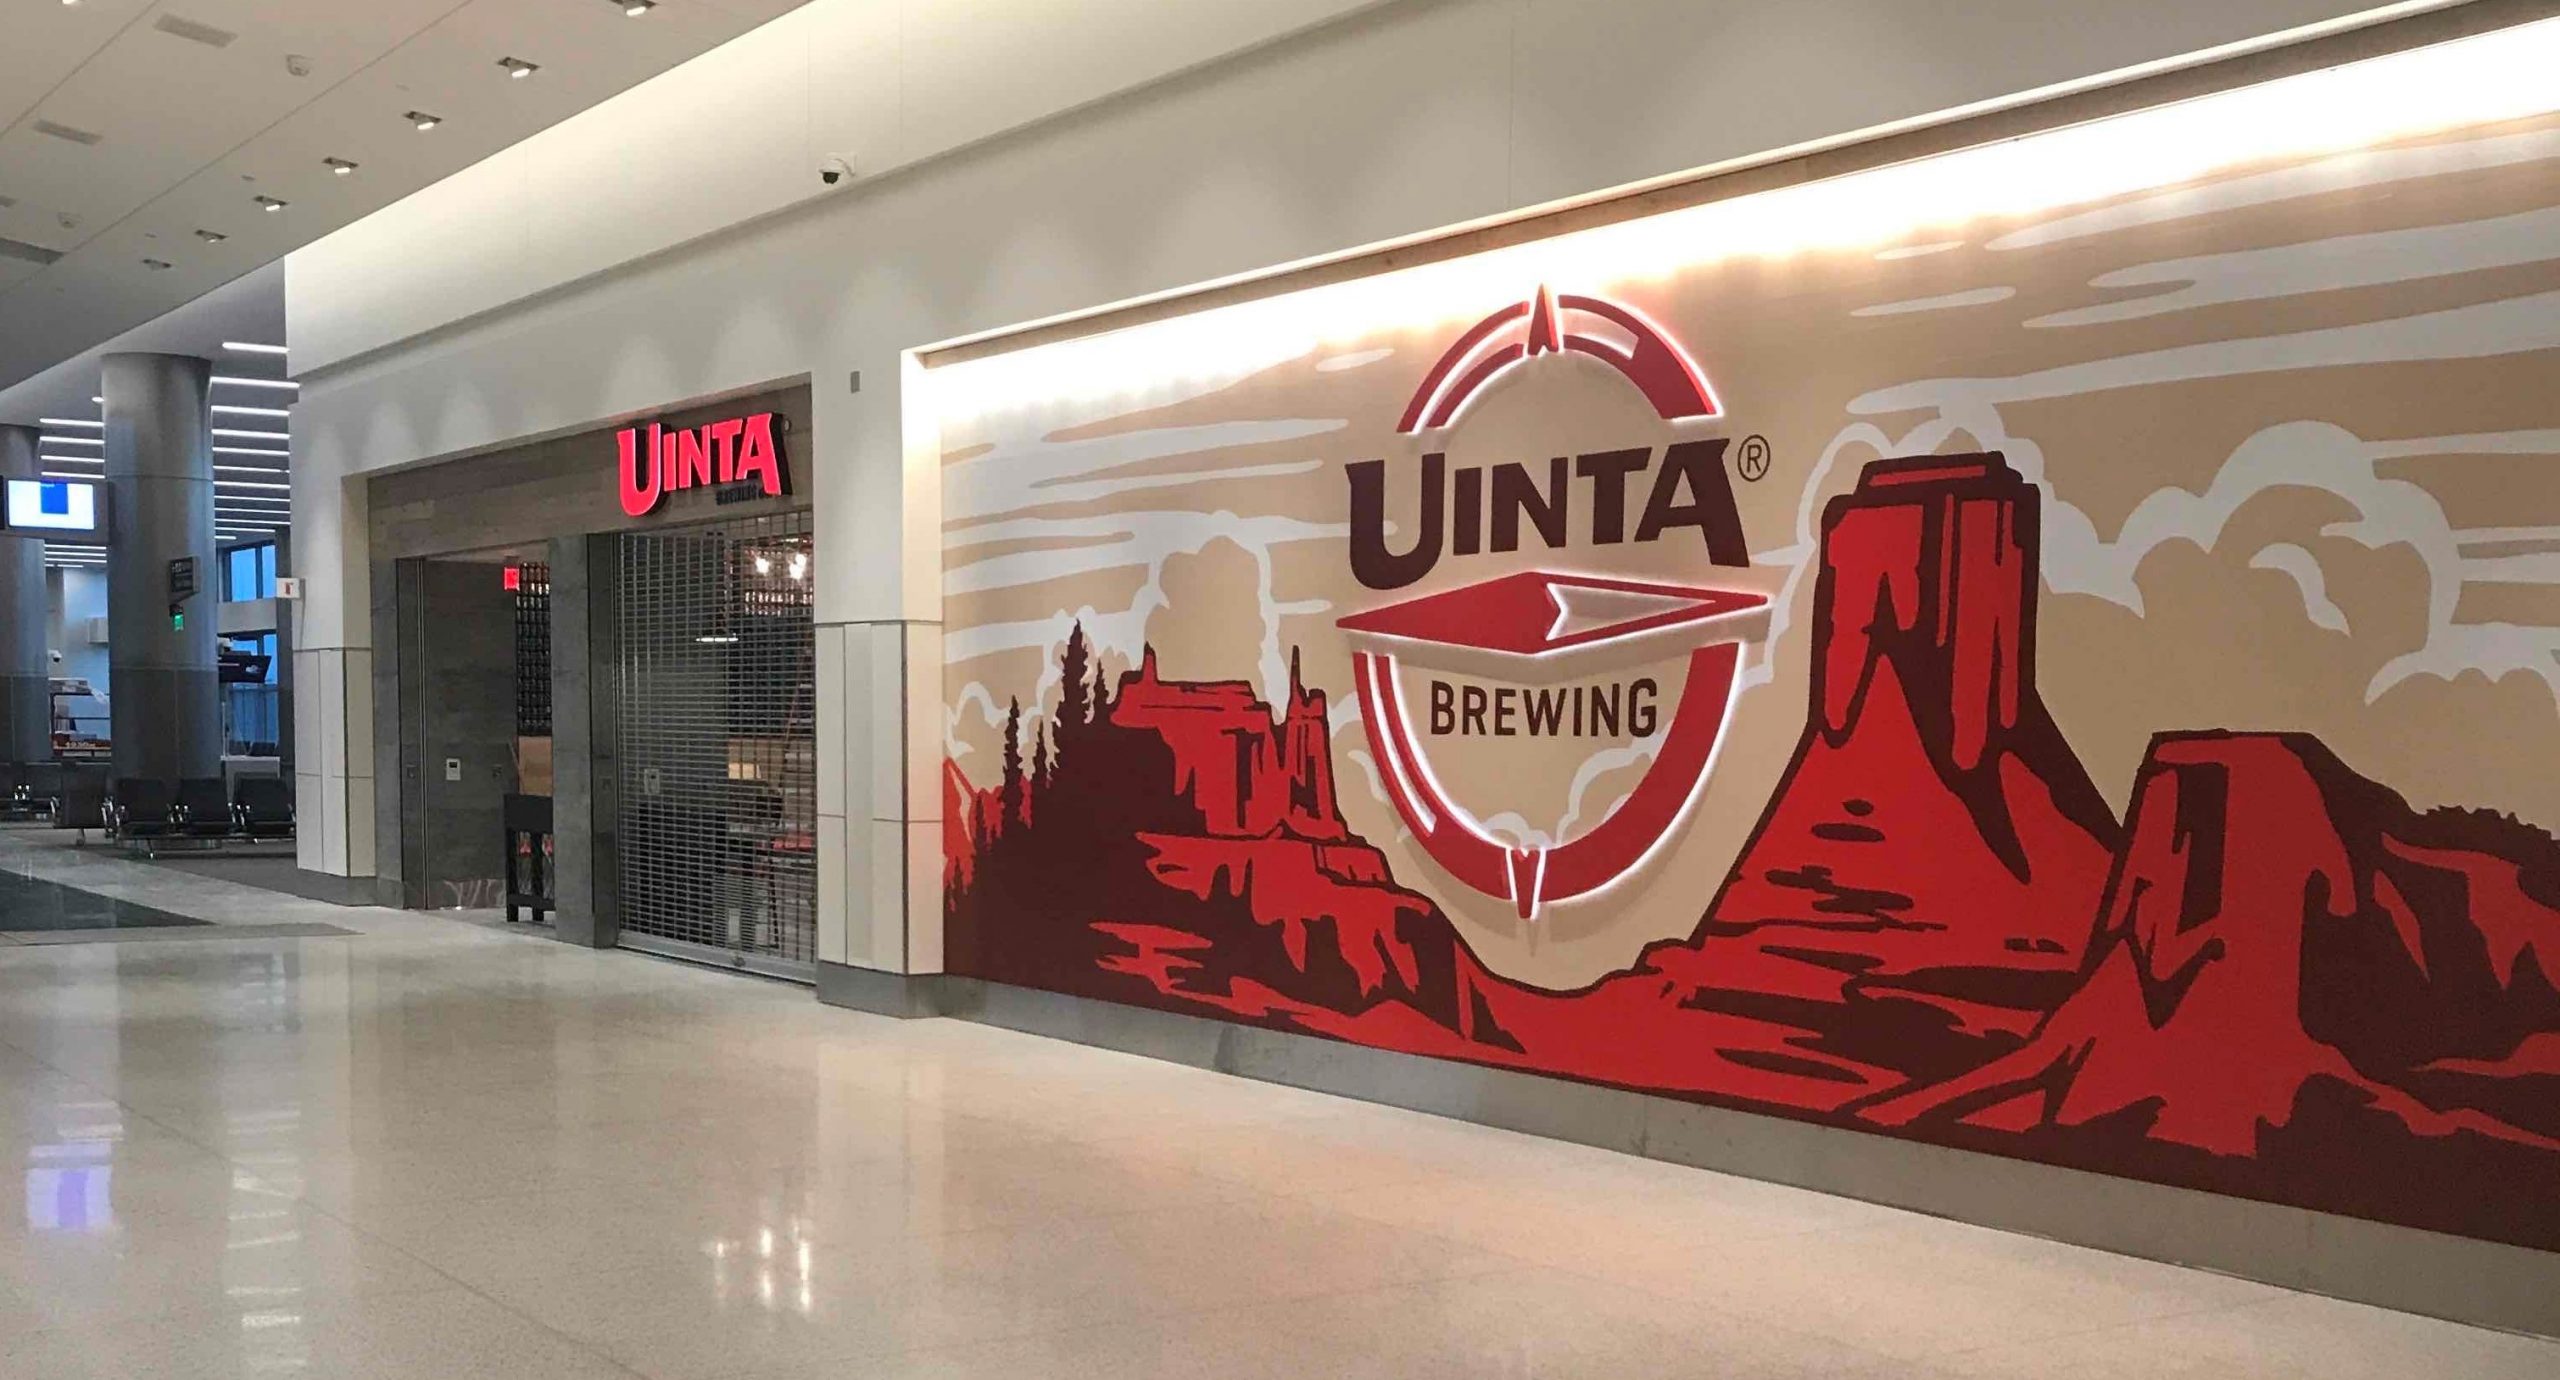 Uinta Brewing in Salt Lake City International Airport (Concourse B Grand Opening)